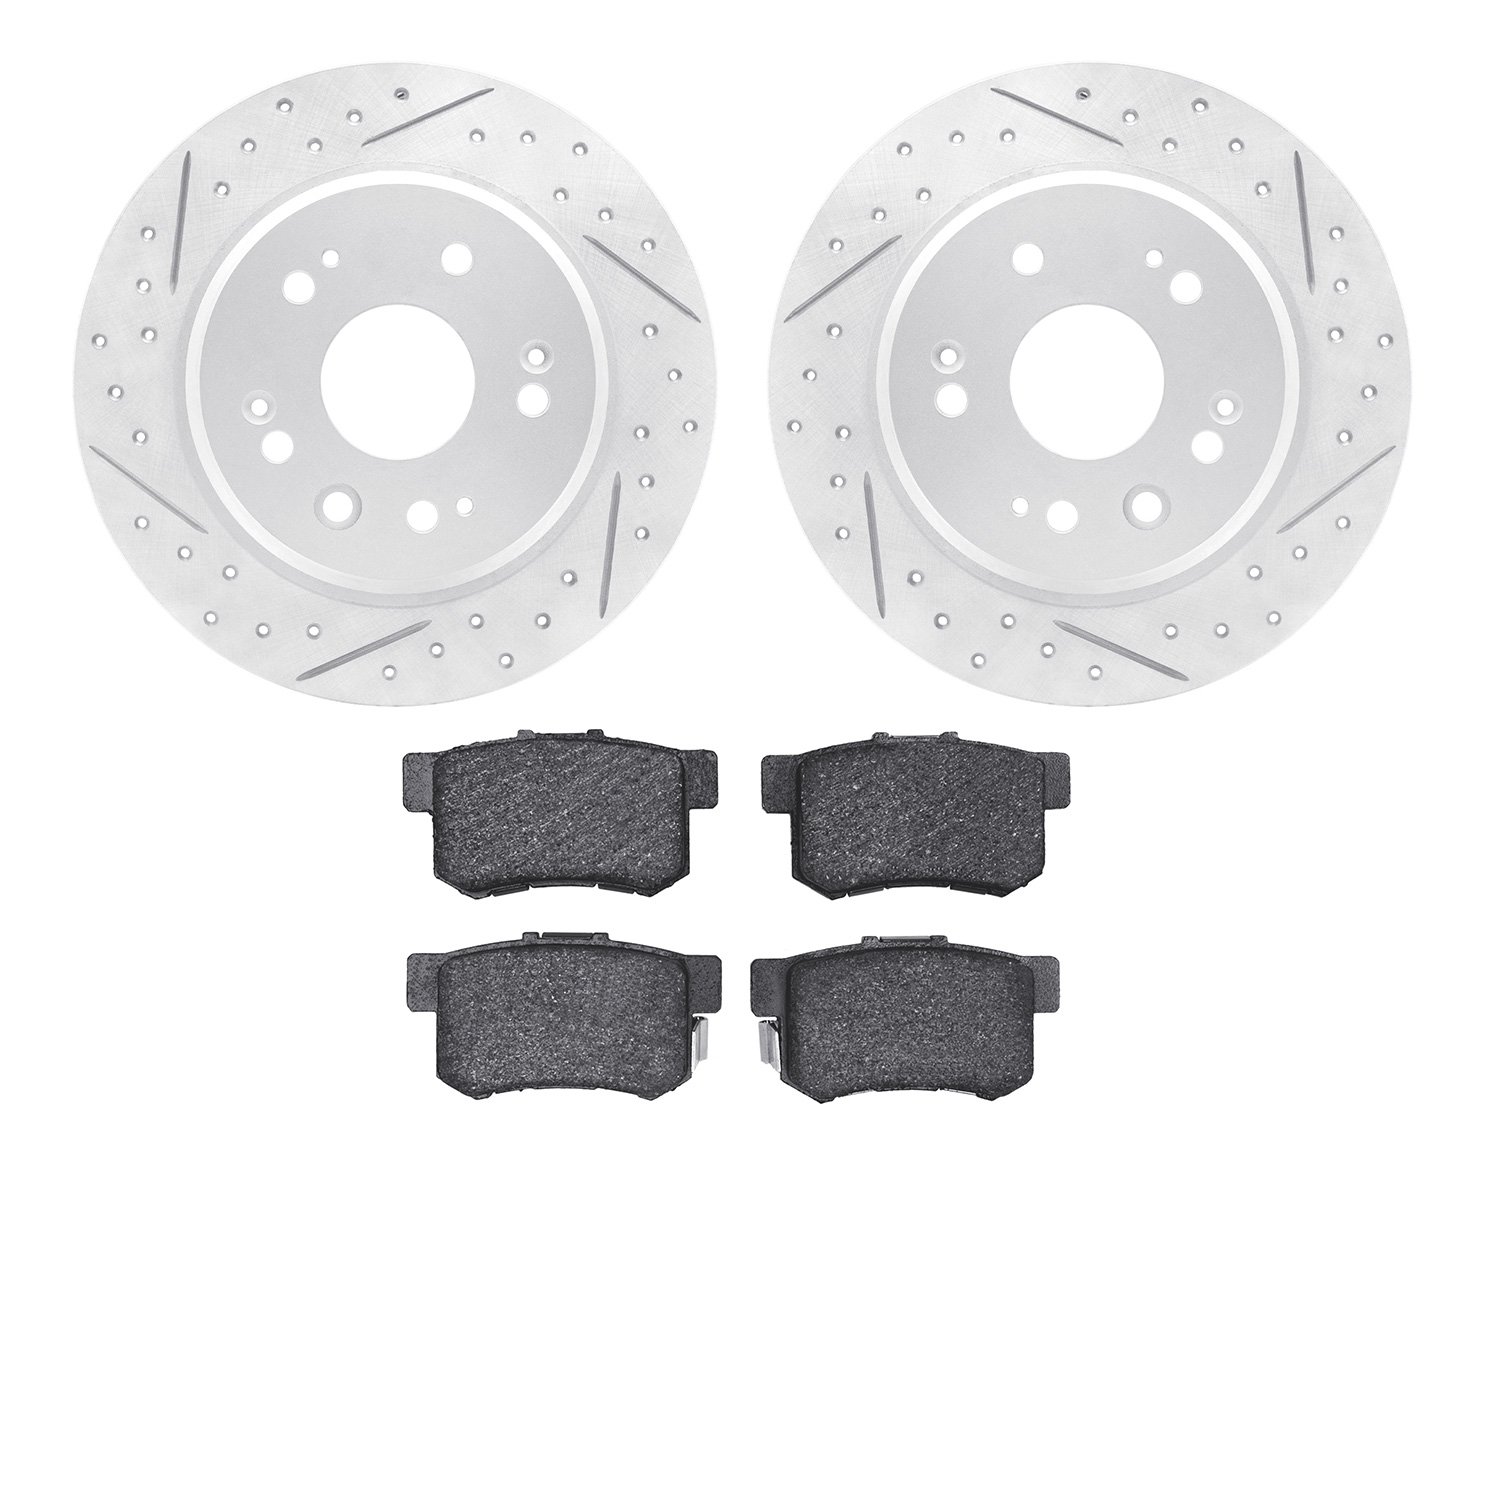 2502-59059 Geoperformance Drilled/Slotted Rotors w/5000 Advanced Brake Pads Kit, 2002-2004 Acura/Honda, Position: Rear